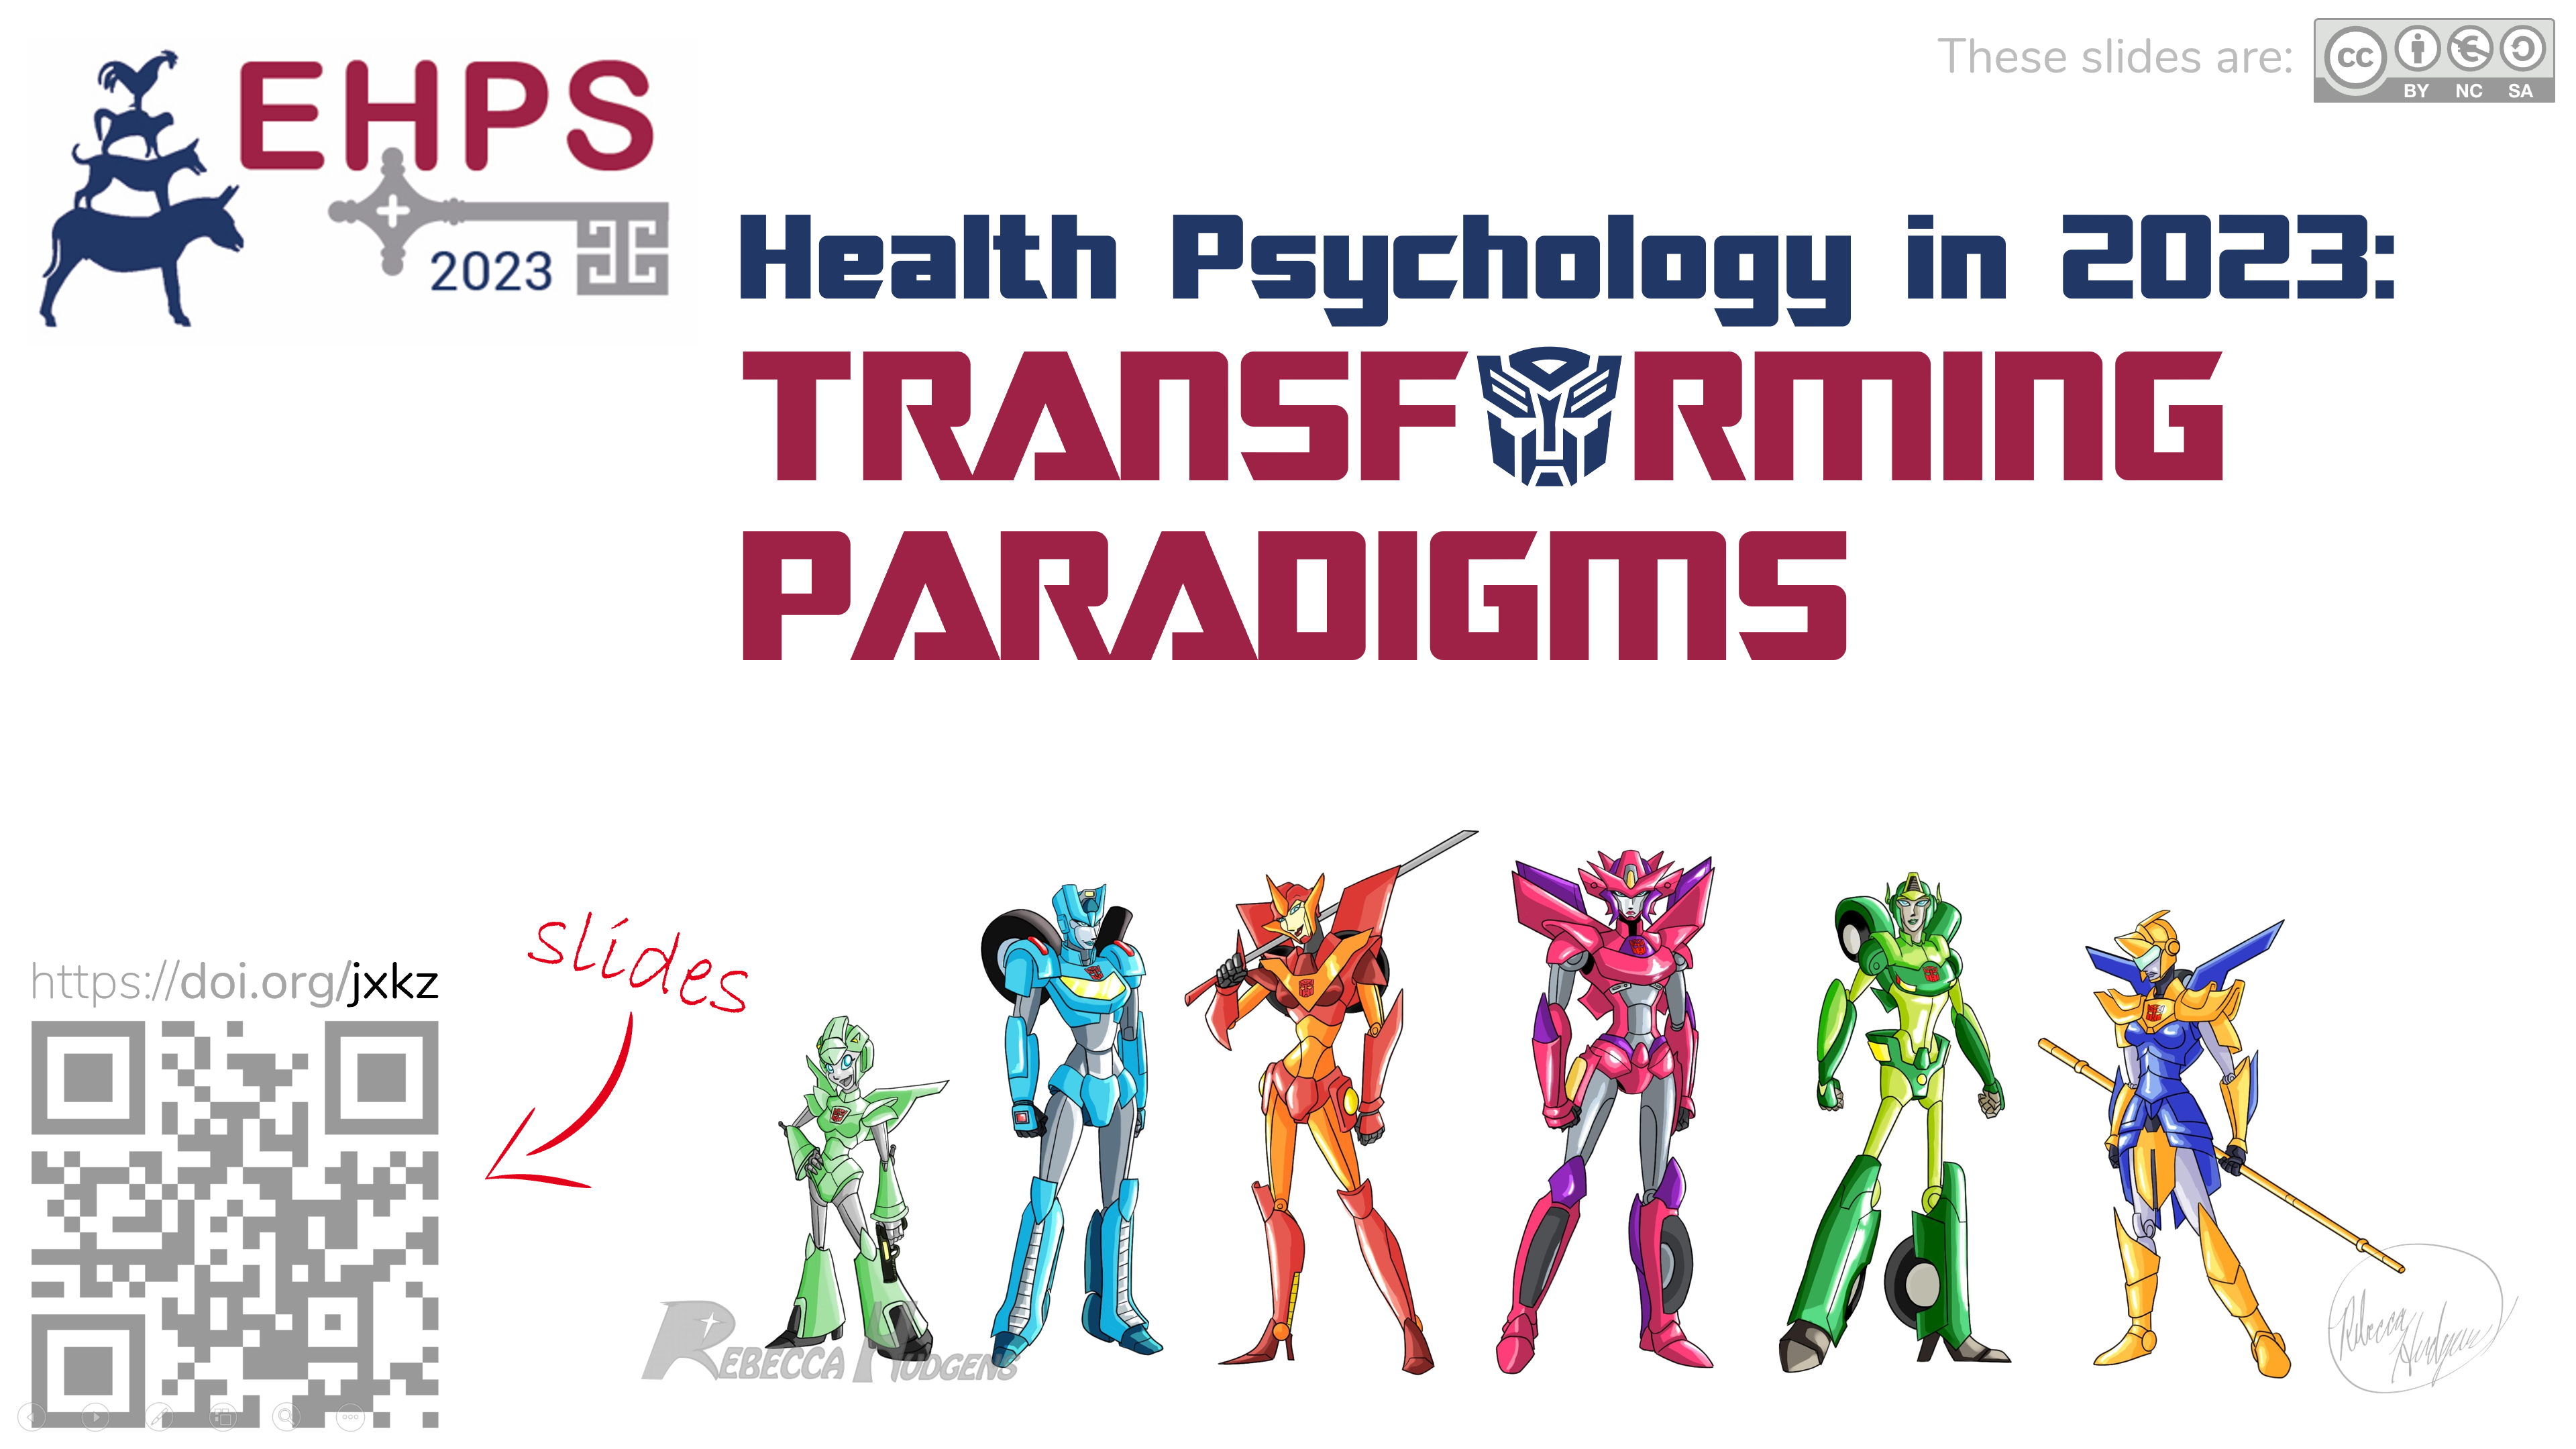 The title slide; showing 'Health Psychology in 2023: transforming paradigms', with a number of transformers and a QR code linking for a ShortDOI linking to https://doi.org/jxkz